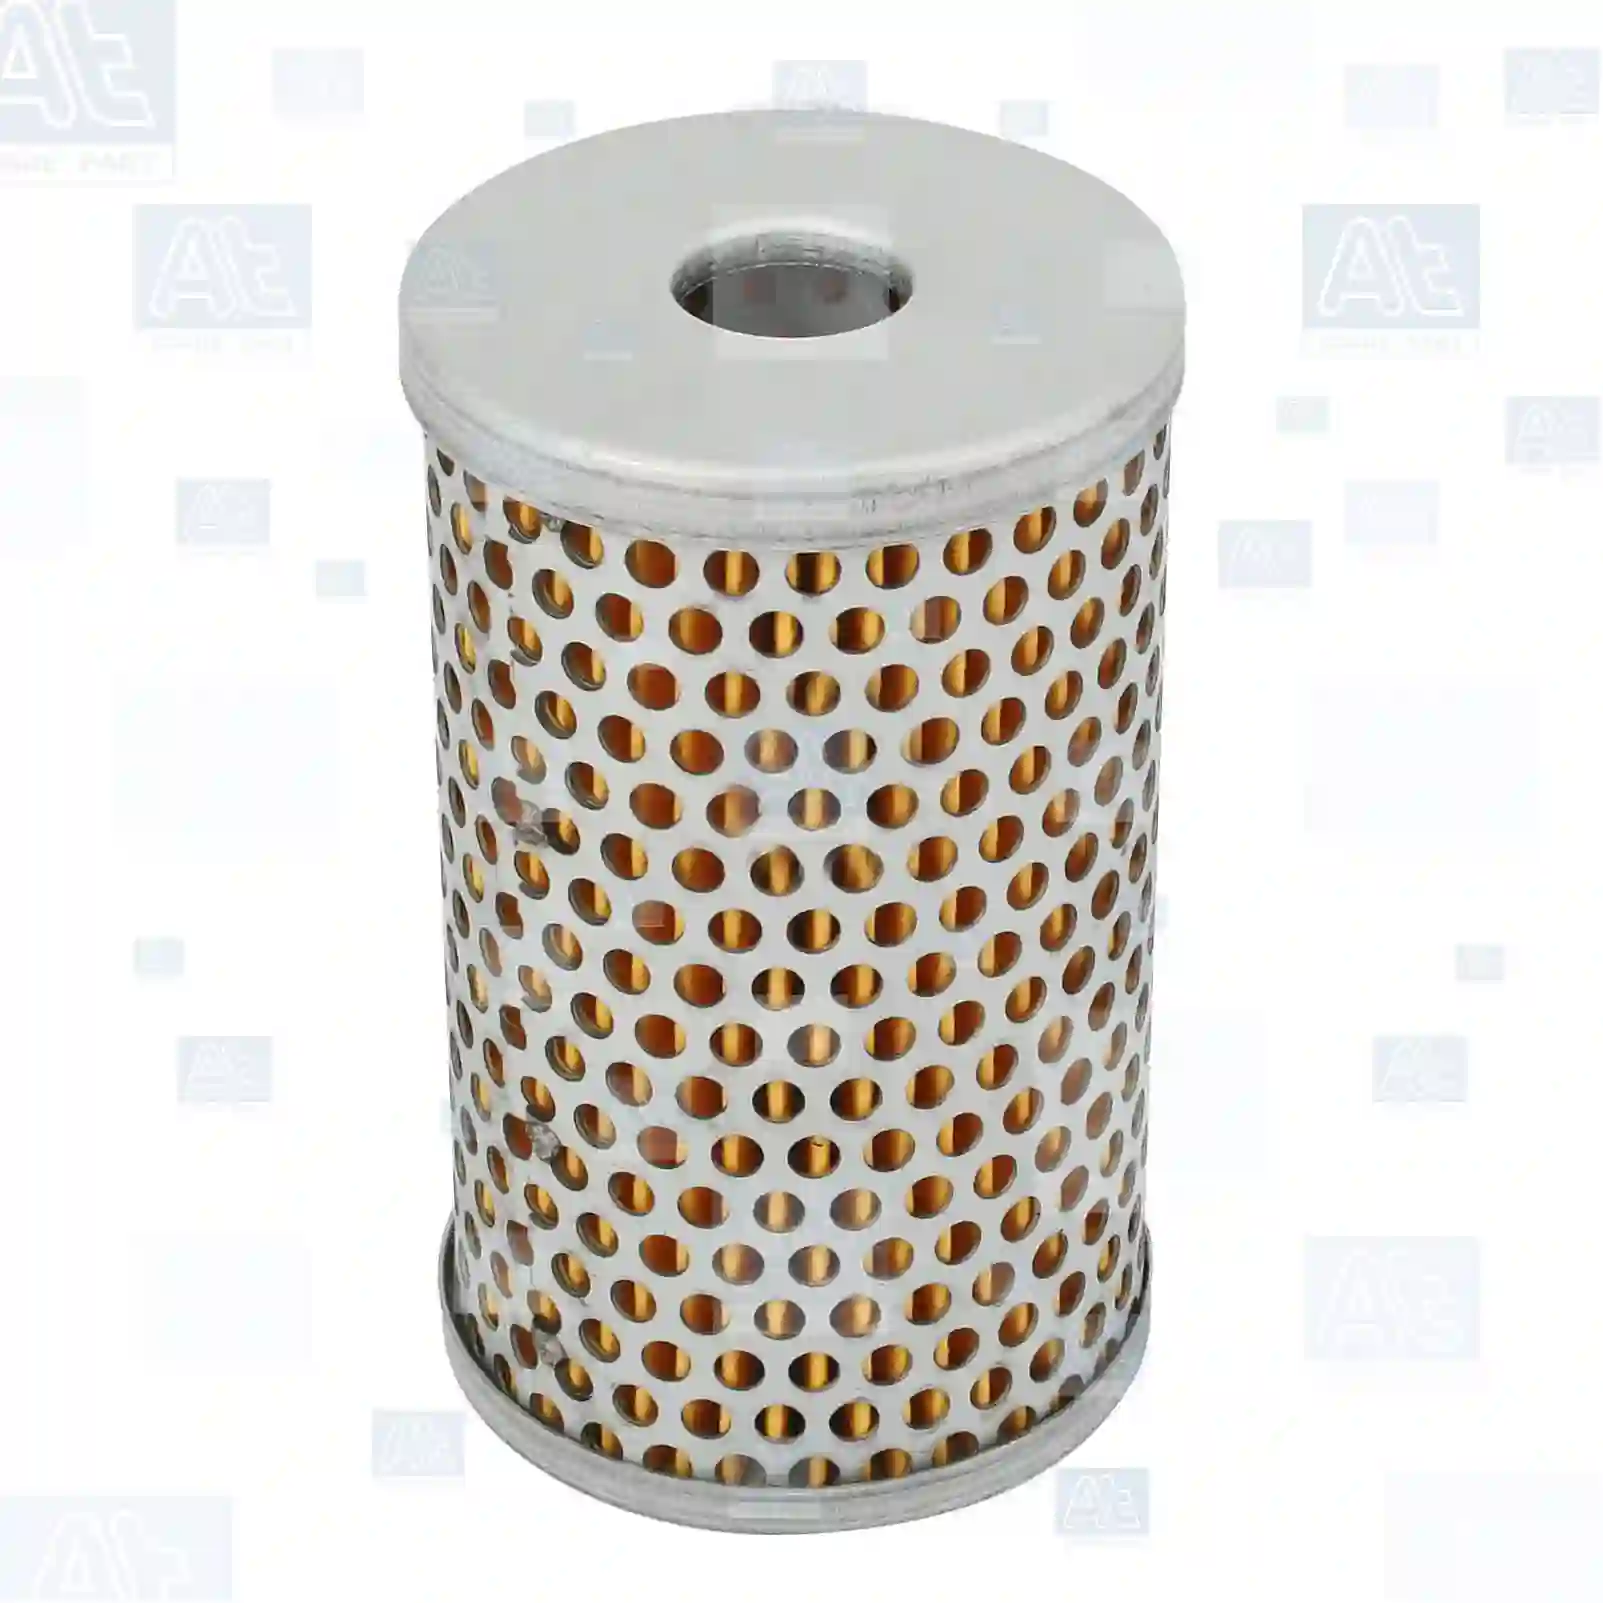 Oil filter insert, 77705048, 01902137, 02966261, T11145397, 0004662804, 0661135, 0661160, 11420661132, 11420661135, 11420661160, 11421256260, 11429061088, 11507423009, 11507425104, 32411120717, 11842225, 1842225, 1844901, 4660204, 4660604, 0229348, 1500663, 2293248, 229348, 491810, 7632141111, 905480, BBU5866, 02966251, 02966261, 2680500218, 00269661, 01902137, 02696621, 02966251, 02966261, 09914553, 42559501, 45481348, 5000674, 5000675, 5000676, 5011425, 5012553, OG0000084646, 5577966, 7984959, 9975217, 5577966, 7984260, 7984959, 93156615, 97094732, 2889829M91, 371912793, 04045601, 00966261, 01268424, 01902137, 01908082, 02696621, 02966251, 02966261, 09914553, 1902137, 2966261, 42553041, 42559501, 503120251, 5000820895, 5001018962, 02966251, 02966261, 81473016005, 81473070008, 85400003330, 2889829, 2889829M91, 0000940404, 0001184225, 0001842225, 0001842325, 0001844701, 0001844901, 0001845801, 0001846301, 0001846525, 0004660204, 0004660404, 0004660604, 0004662804, 0004663004, 0011842225, 0021841125, 1021800109, 1021840425, 8225000030, 8225000232, 013200300, 5000814407, 5000820895, 5001871595, 5021107375, 6005019563, 6005019804, 7400349619, 7420580233, 7421392404, 8499135552, HD604, 00119590, 1343242, 153465, 153468, 1953094, 8225000030, 8225000232, 1296311510, 1696311510, 5104504020, 480A4700748, 480A470060, 480A470748, 5011070580, 216230, 632114112, 15856180, 20580233, 21392404, 349619, 3496191, 3496197, 6612098, 7349619, 85103870, 2V5422384A, 400700504, T11145397, ZG03044-0008 ||  77705048 At Spare Part | Engine, Accelerator Pedal, Camshaft, Connecting Rod, Crankcase, Crankshaft, Cylinder Head, Engine Suspension Mountings, Exhaust Manifold, Exhaust Gas Recirculation, Filter Kits, Flywheel Housing, General Overhaul Kits, Engine, Intake Manifold, Oil Cleaner, Oil Cooler, Oil Filter, Oil Pump, Oil Sump, Piston & Liner, Sensor & Switch, Timing Case, Turbocharger, Cooling System, Belt Tensioner, Coolant Filter, Coolant Pipe, Corrosion Prevention Agent, Drive, Expansion Tank, Fan, Intercooler, Monitors & Gauges, Radiator, Thermostat, V-Belt / Timing belt, Water Pump, Fuel System, Electronical Injector Unit, Feed Pump, Fuel Filter, cpl., Fuel Gauge Sender,  Fuel Line, Fuel Pump, Fuel Tank, Injection Line Kit, Injection Pump, Exhaust System, Clutch & Pedal, Gearbox, Propeller Shaft, Axles, Brake System, Hubs & Wheels, Suspension, Leaf Spring, Universal Parts / Accessories, Steering, Electrical System, Cabin Oil filter insert, 77705048, 01902137, 02966261, T11145397, 0004662804, 0661135, 0661160, 11420661132, 11420661135, 11420661160, 11421256260, 11429061088, 11507423009, 11507425104, 32411120717, 11842225, 1842225, 1844901, 4660204, 4660604, 0229348, 1500663, 2293248, 229348, 491810, 7632141111, 905480, BBU5866, 02966251, 02966261, 2680500218, 00269661, 01902137, 02696621, 02966251, 02966261, 09914553, 42559501, 45481348, 5000674, 5000675, 5000676, 5011425, 5012553, OG0000084646, 5577966, 7984959, 9975217, 5577966, 7984260, 7984959, 93156615, 97094732, 2889829M91, 371912793, 04045601, 00966261, 01268424, 01902137, 01908082, 02696621, 02966251, 02966261, 09914553, 1902137, 2966261, 42553041, 42559501, 503120251, 5000820895, 5001018962, 02966251, 02966261, 81473016005, 81473070008, 85400003330, 2889829, 2889829M91, 0000940404, 0001184225, 0001842225, 0001842325, 0001844701, 0001844901, 0001845801, 0001846301, 0001846525, 0004660204, 0004660404, 0004660604, 0004662804, 0004663004, 0011842225, 0021841125, 1021800109, 1021840425, 8225000030, 8225000232, 013200300, 5000814407, 5000820895, 5001871595, 5021107375, 6005019563, 6005019804, 7400349619, 7420580233, 7421392404, 8499135552, HD604, 00119590, 1343242, 153465, 153468, 1953094, 8225000030, 8225000232, 1296311510, 1696311510, 5104504020, 480A4700748, 480A470060, 480A470748, 5011070580, 216230, 632114112, 15856180, 20580233, 21392404, 349619, 3496191, 3496197, 6612098, 7349619, 85103870, 2V5422384A, 400700504, T11145397, ZG03044-0008 ||  77705048 At Spare Part | Engine, Accelerator Pedal, Camshaft, Connecting Rod, Crankcase, Crankshaft, Cylinder Head, Engine Suspension Mountings, Exhaust Manifold, Exhaust Gas Recirculation, Filter Kits, Flywheel Housing, General Overhaul Kits, Engine, Intake Manifold, Oil Cleaner, Oil Cooler, Oil Filter, Oil Pump, Oil Sump, Piston & Liner, Sensor & Switch, Timing Case, Turbocharger, Cooling System, Belt Tensioner, Coolant Filter, Coolant Pipe, Corrosion Prevention Agent, Drive, Expansion Tank, Fan, Intercooler, Monitors & Gauges, Radiator, Thermostat, V-Belt / Timing belt, Water Pump, Fuel System, Electronical Injector Unit, Feed Pump, Fuel Filter, cpl., Fuel Gauge Sender,  Fuel Line, Fuel Pump, Fuel Tank, Injection Line Kit, Injection Pump, Exhaust System, Clutch & Pedal, Gearbox, Propeller Shaft, Axles, Brake System, Hubs & Wheels, Suspension, Leaf Spring, Universal Parts / Accessories, Steering, Electrical System, Cabin